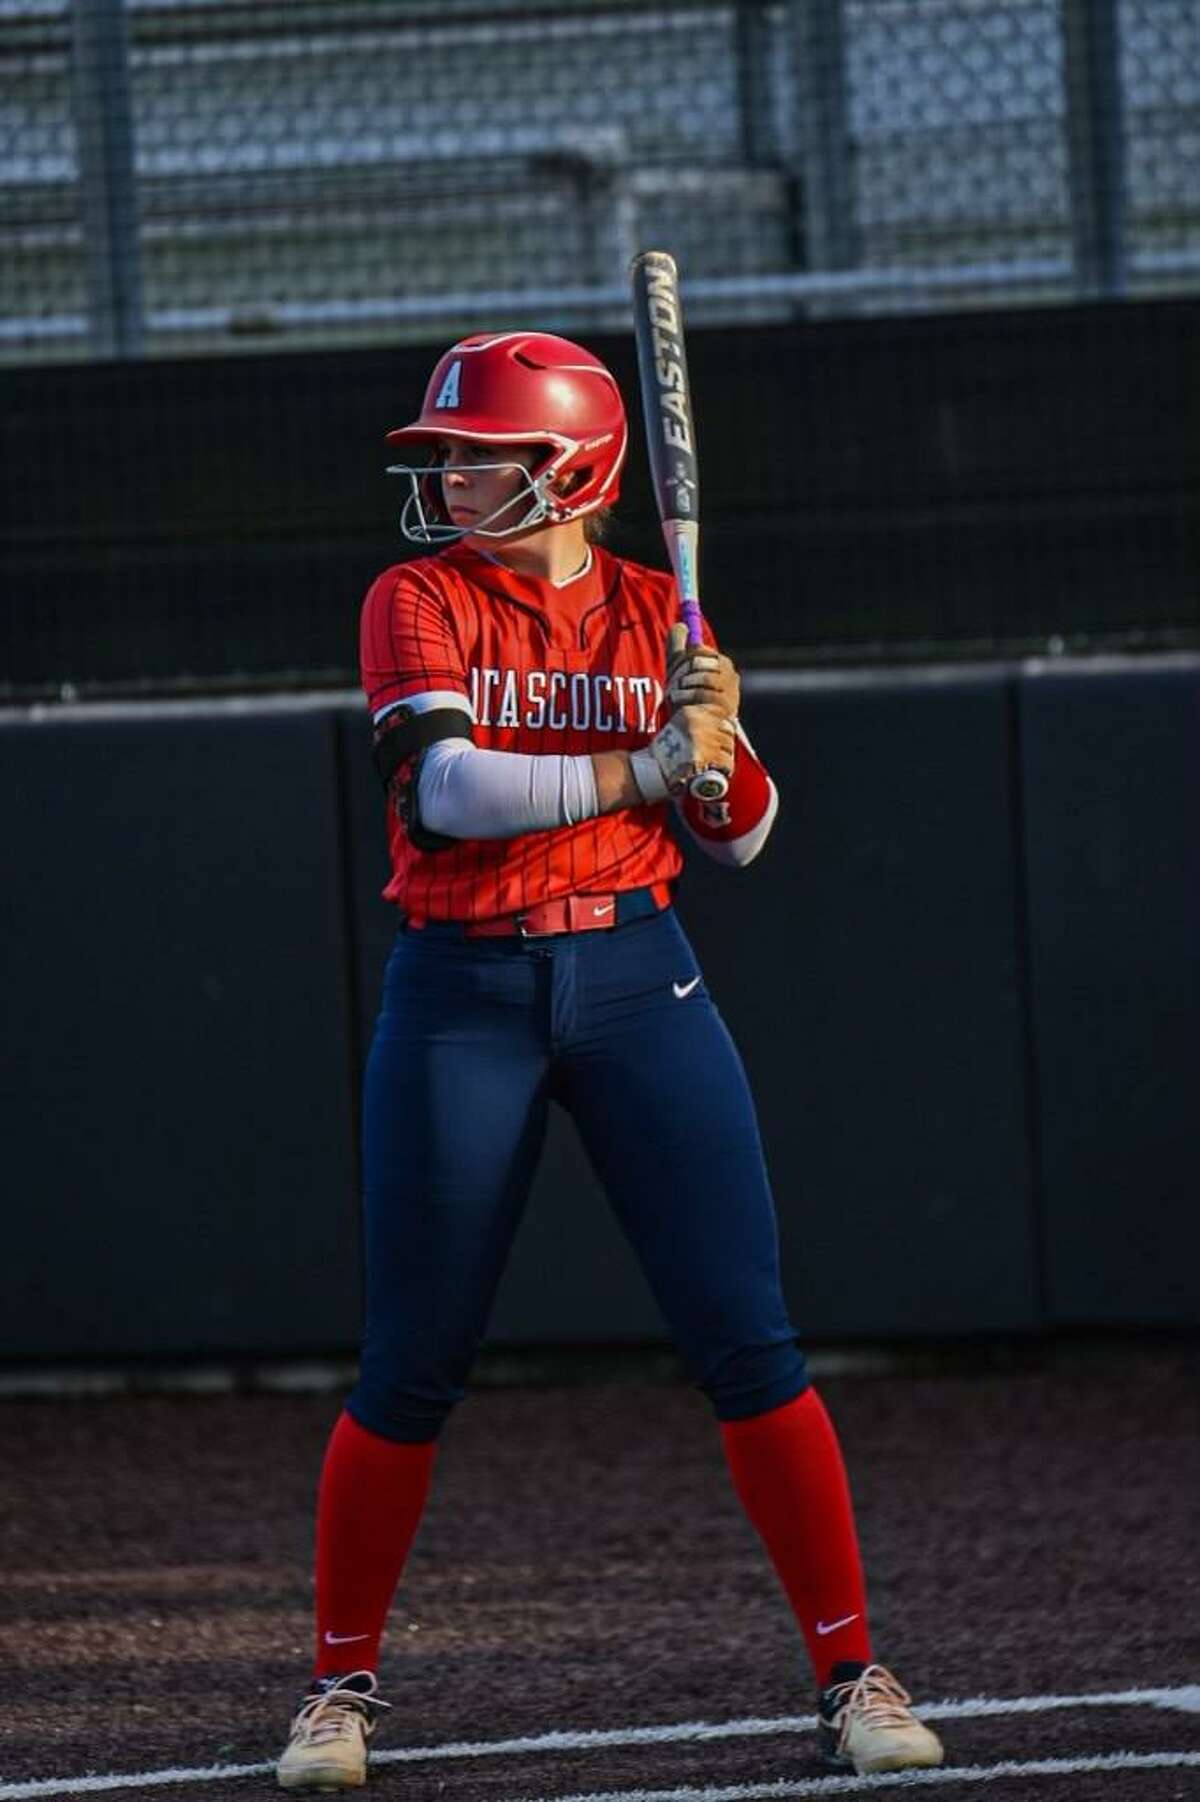 Atascocita's Kasidi Pickering was named the District 21-6A Most Valuable Player. She's a junior committed to Oklahoma.